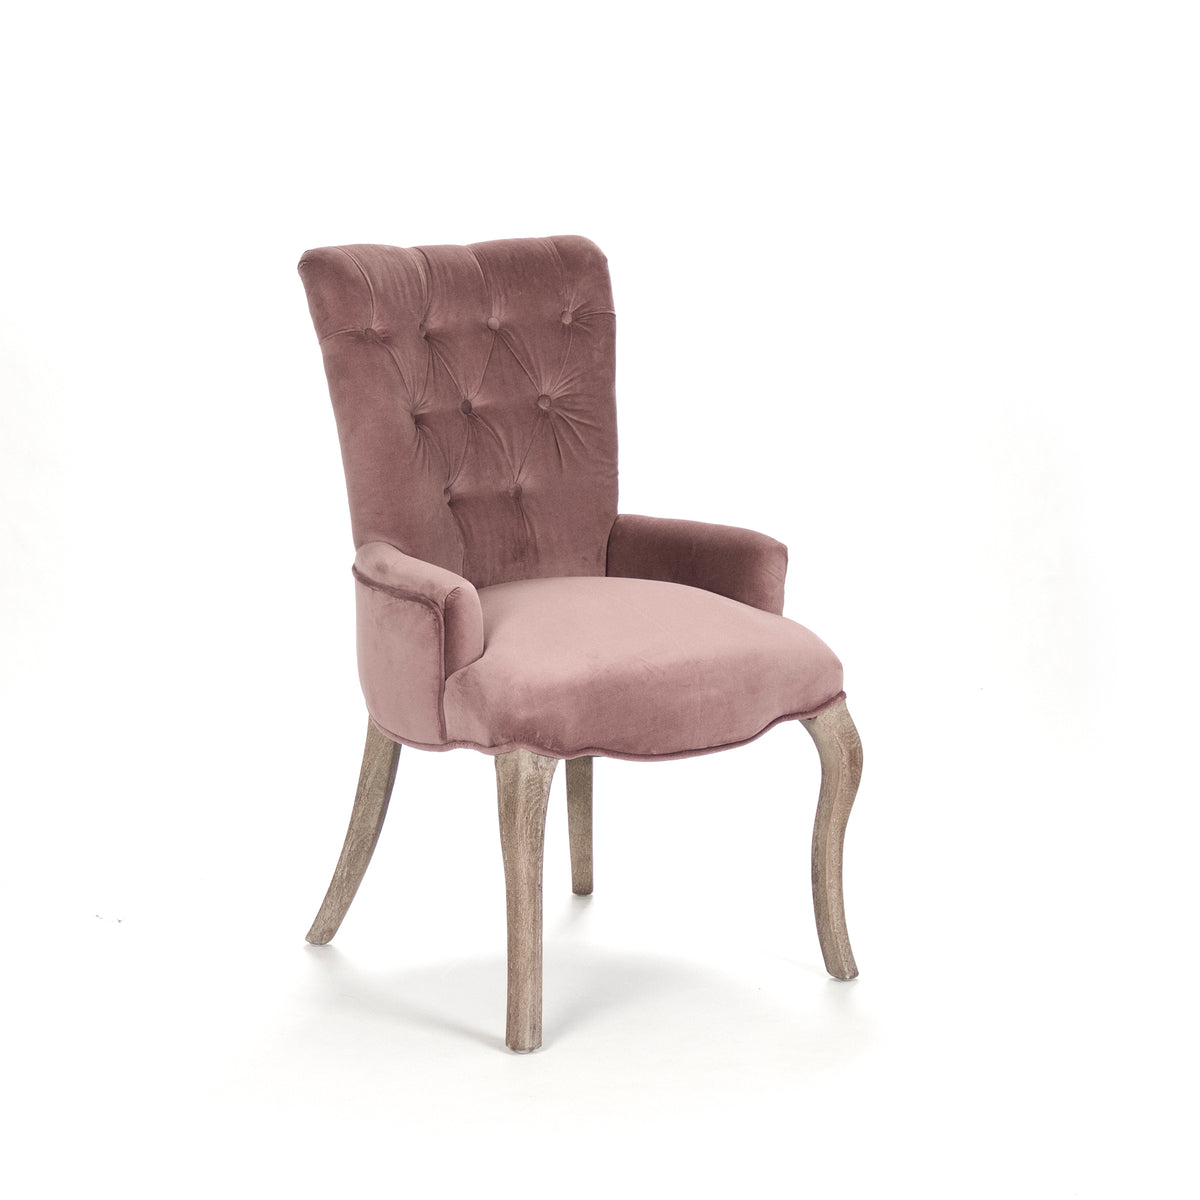 Iris Tufted Chair by Zentique